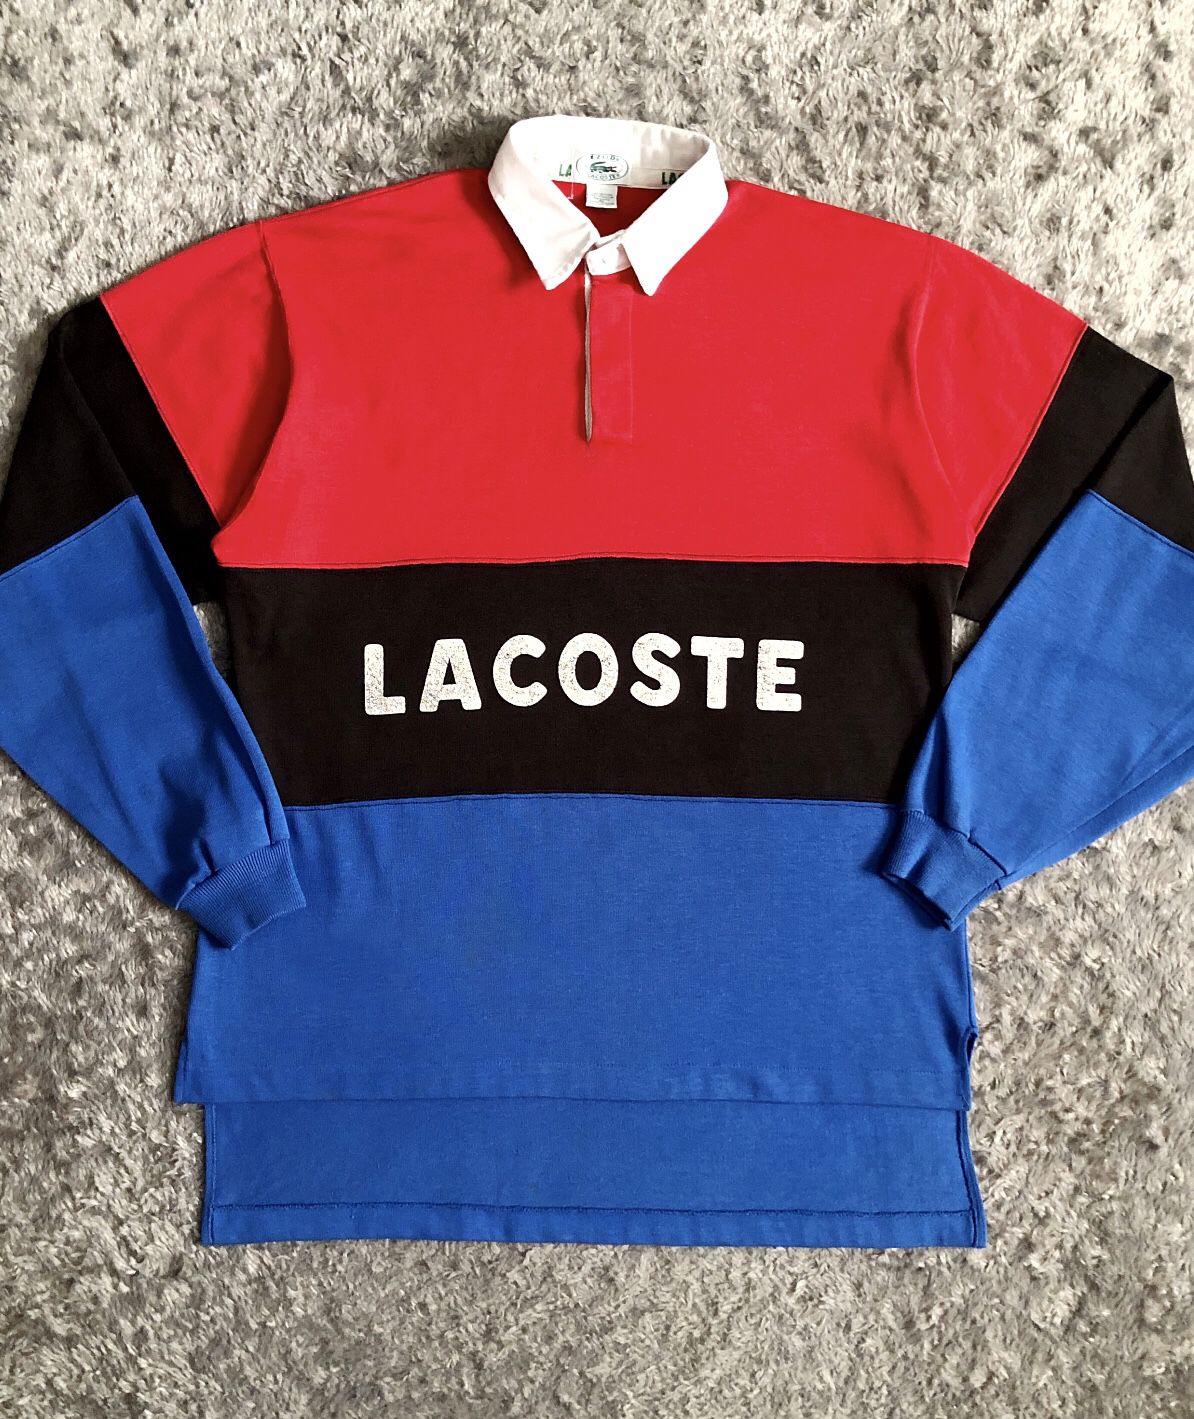 RARE!! Lacoste Vintage 90’s Mens Polo. Size XL Very well kept! The collar looks fresh doesn’t even look worn. If you’re an absolute fan of Lacoste th